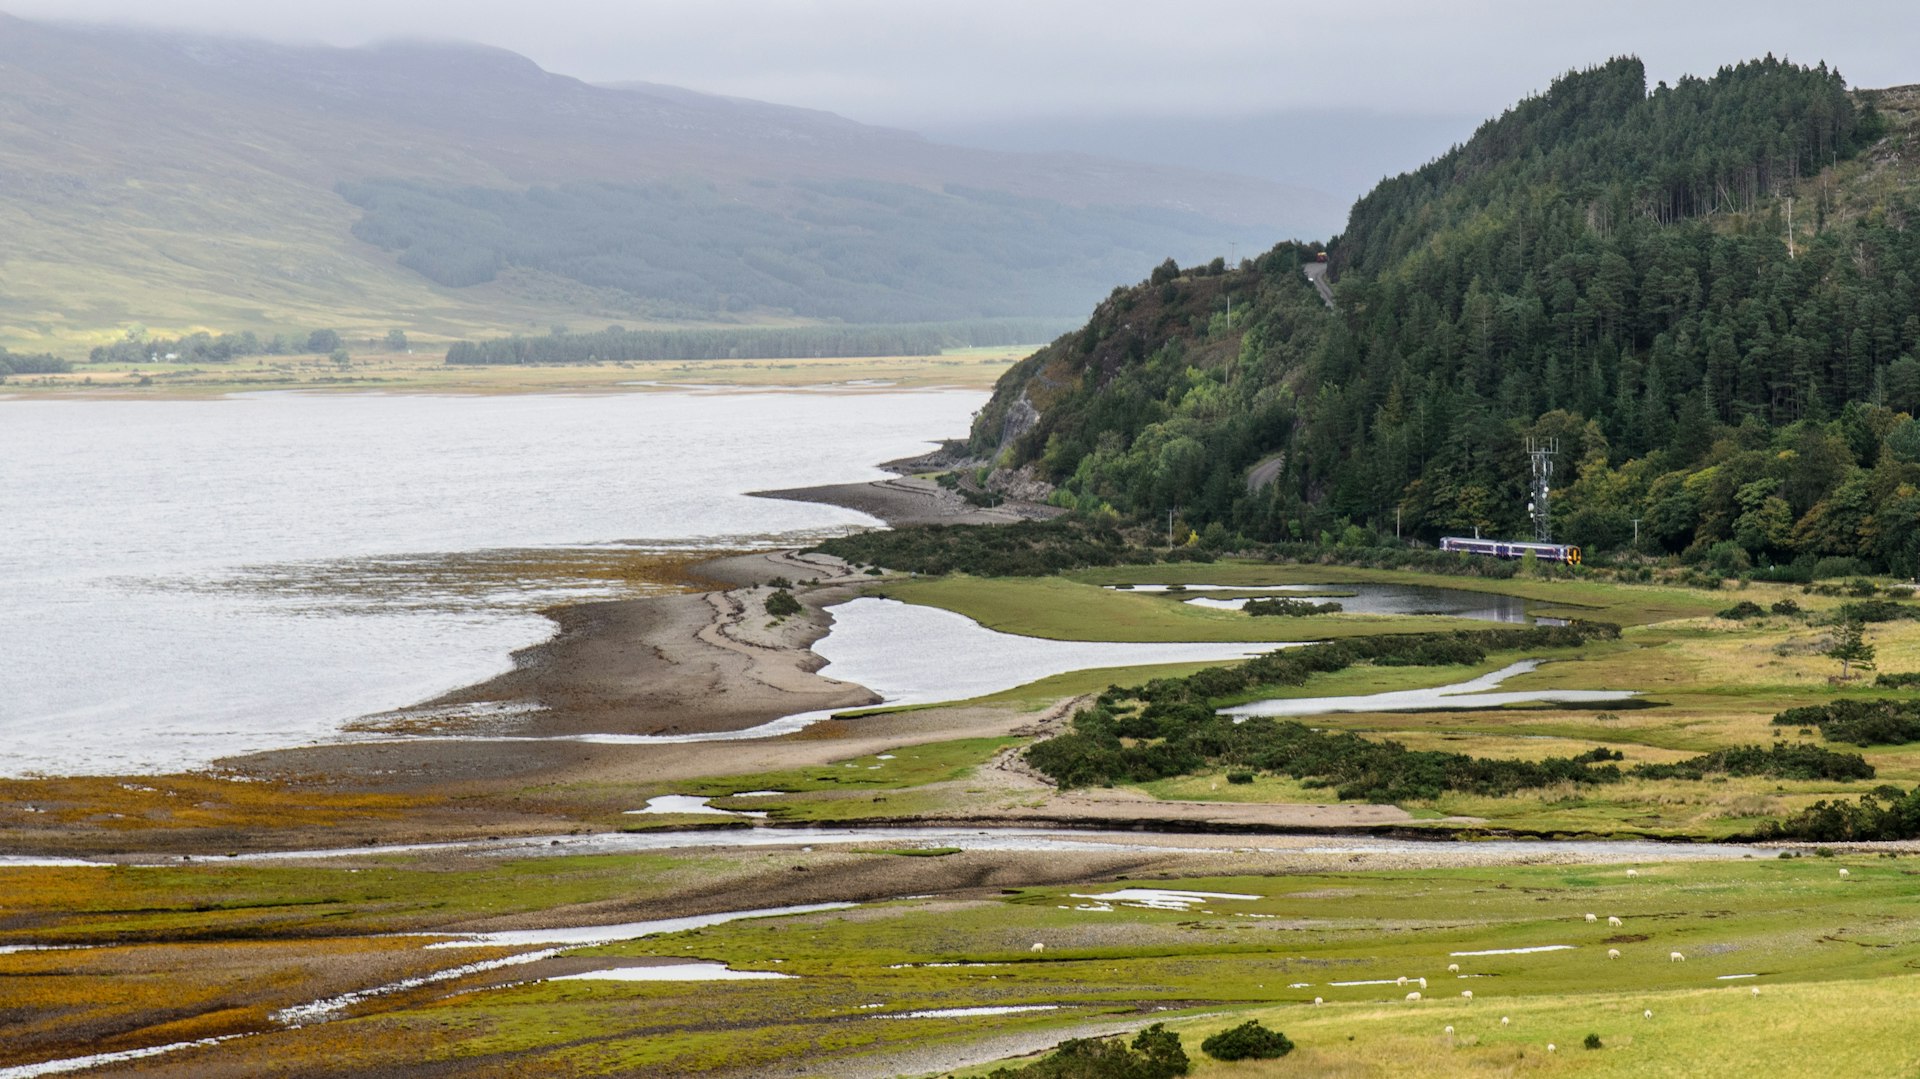 A Scotrail Class 158 diesel passenger train crosses the glacial delta estuary of the River Attadale as it winds along the Kyle Line railway on the coast of Loch Carron, an inlet of the Atlantic Ocean in the West Highlands of Scotland.